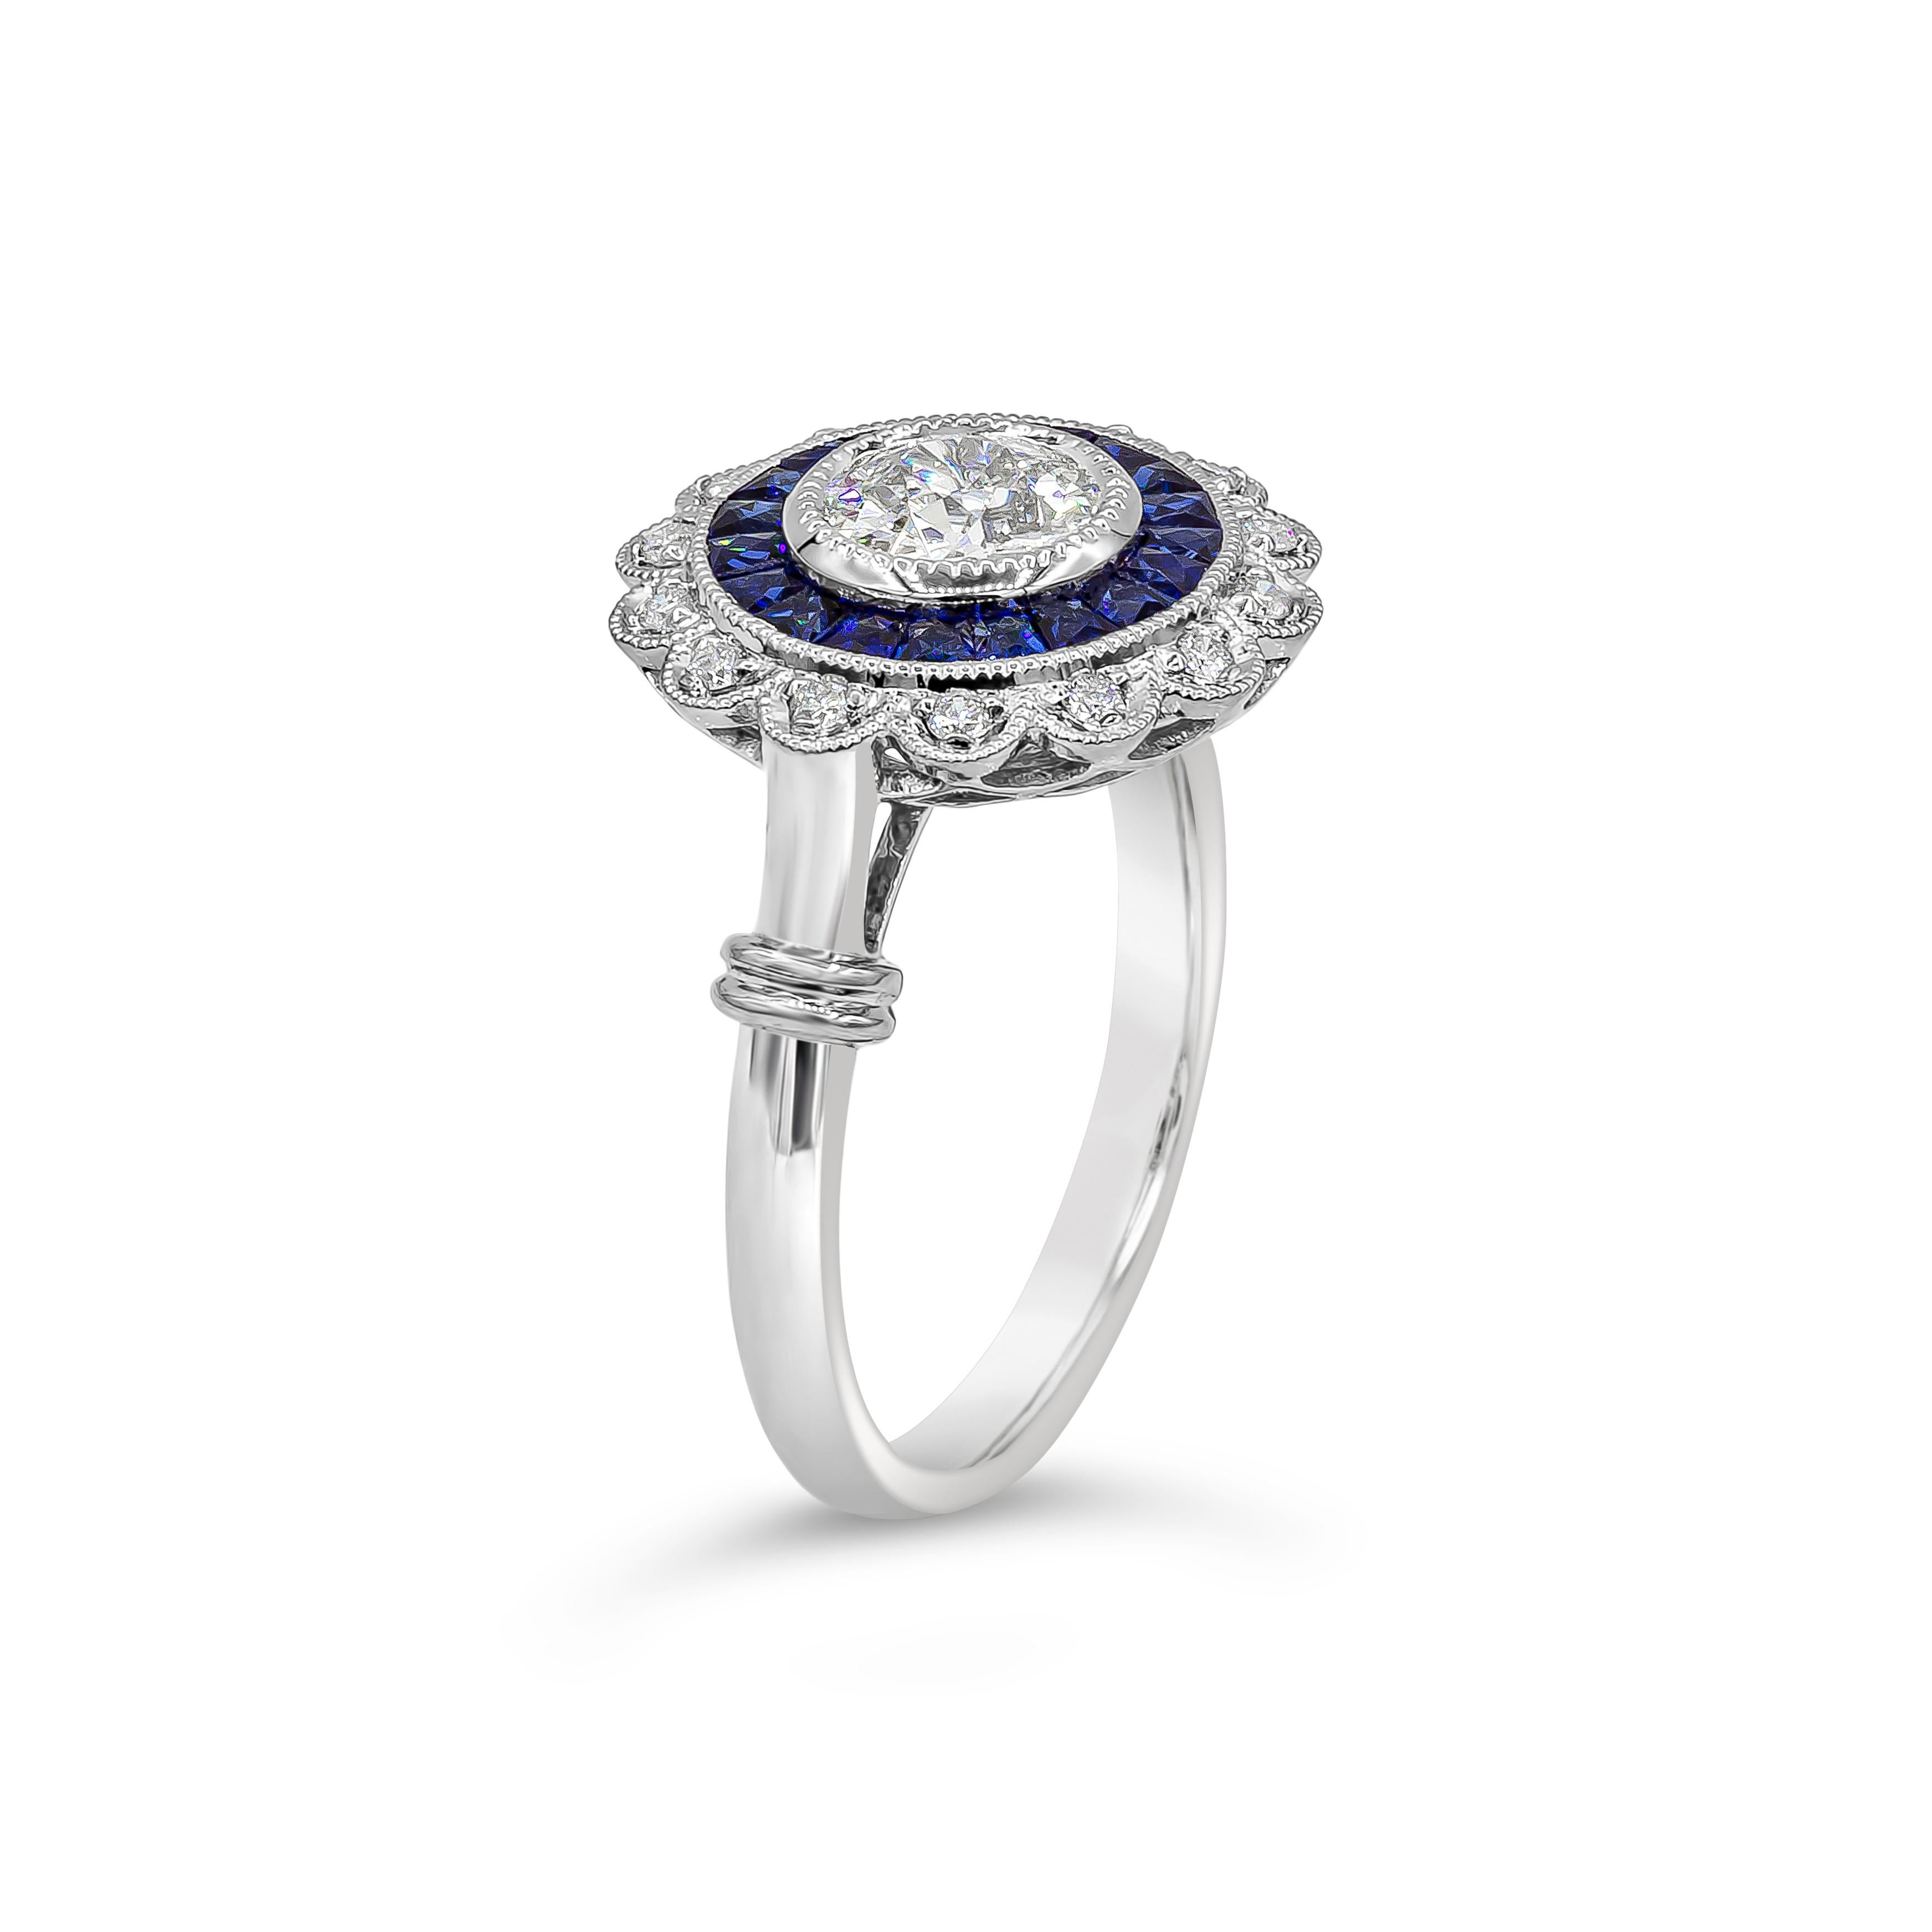 An antique style ring showcasing a 0.75 carat old european cut diamond, elegantly set in a halo made with french cut blue sapphires weighing 0.70 carats total. Finished with round brilliant diamonds arranged in a floral motif. Made in platinum.